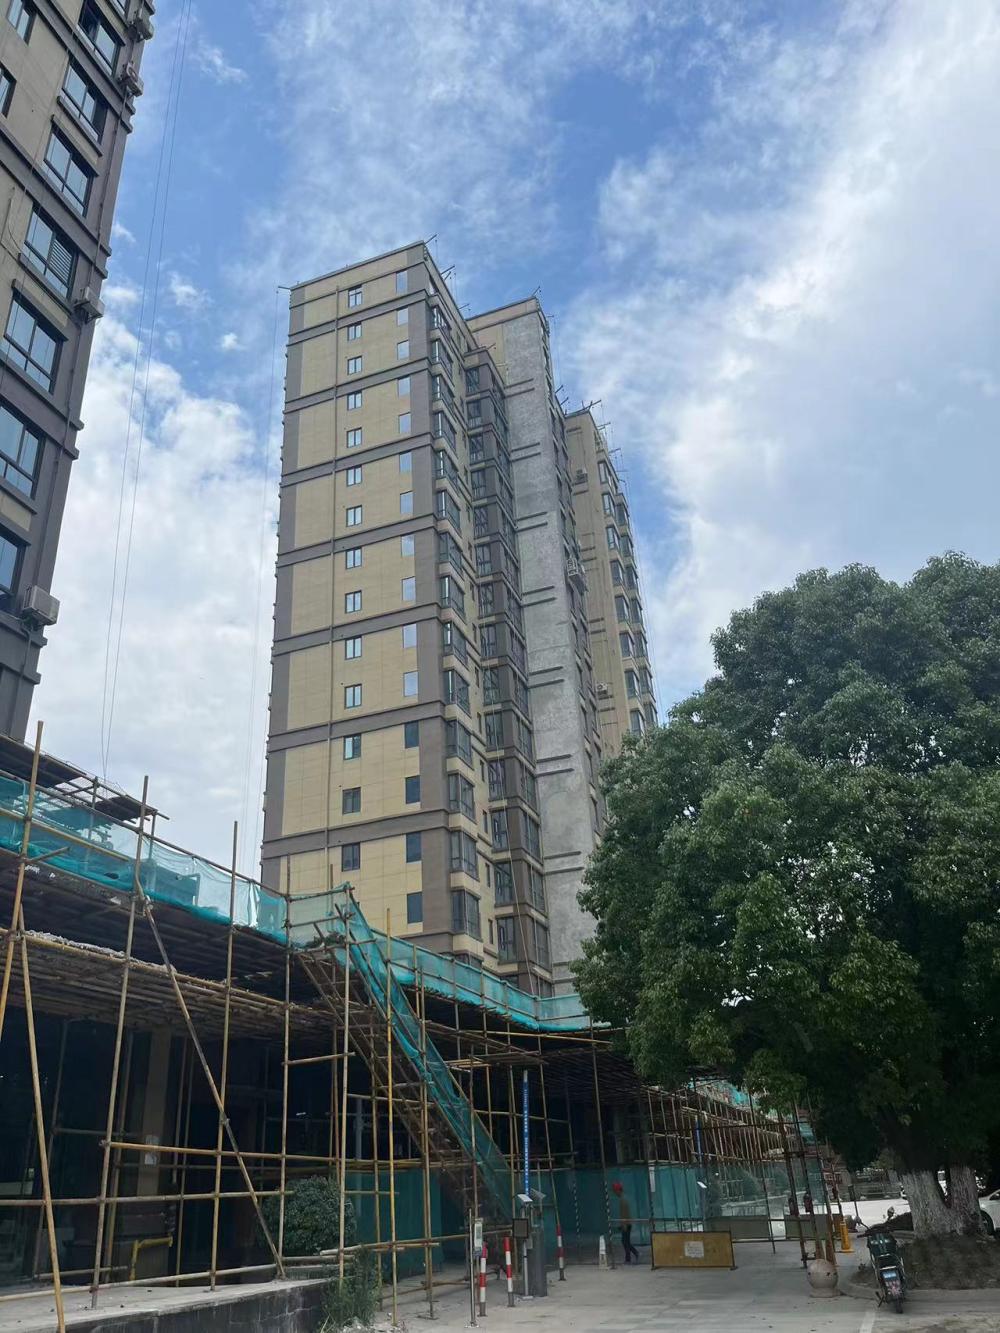 Can the schedule for exterior wall renovation be more reasonable?, Fengxian community has had its air conditioning unit dismantled, with frequent high temperature warnings for the air conditioning unit | exterior wall | community